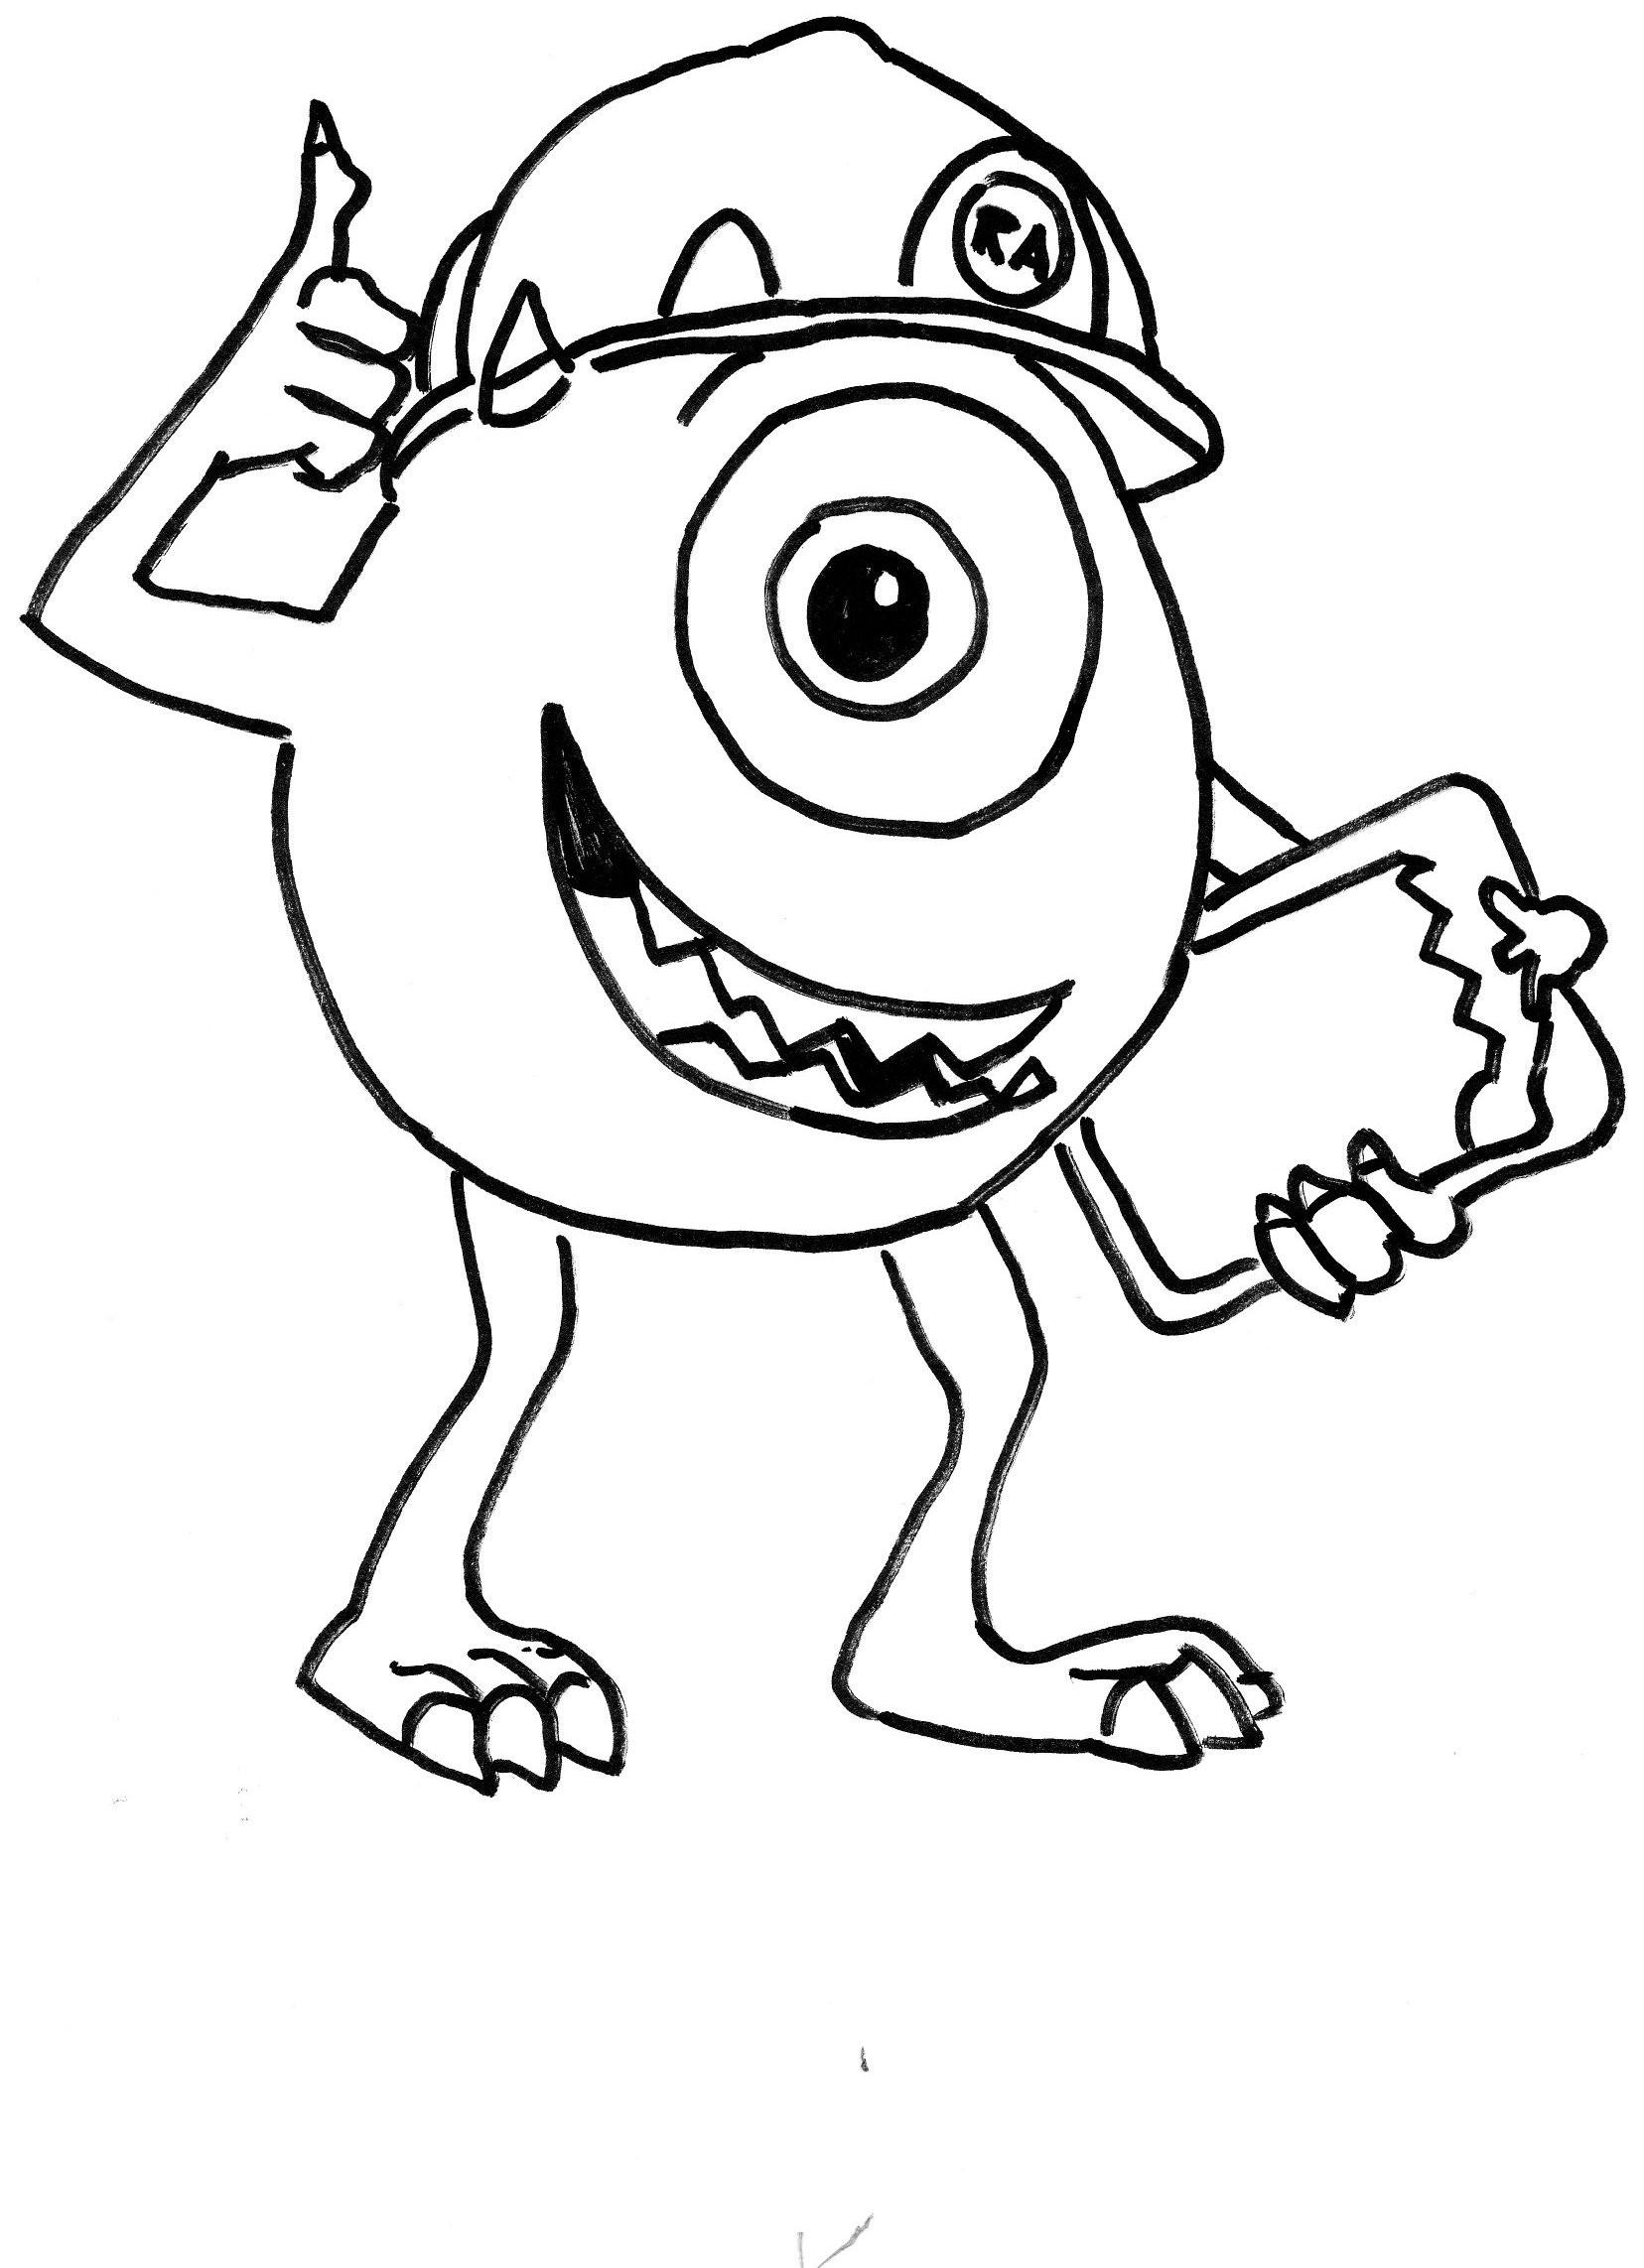 Coloring Pages For Boys With Boys
 Coloring Pages for Boys 2018 Dr Odd